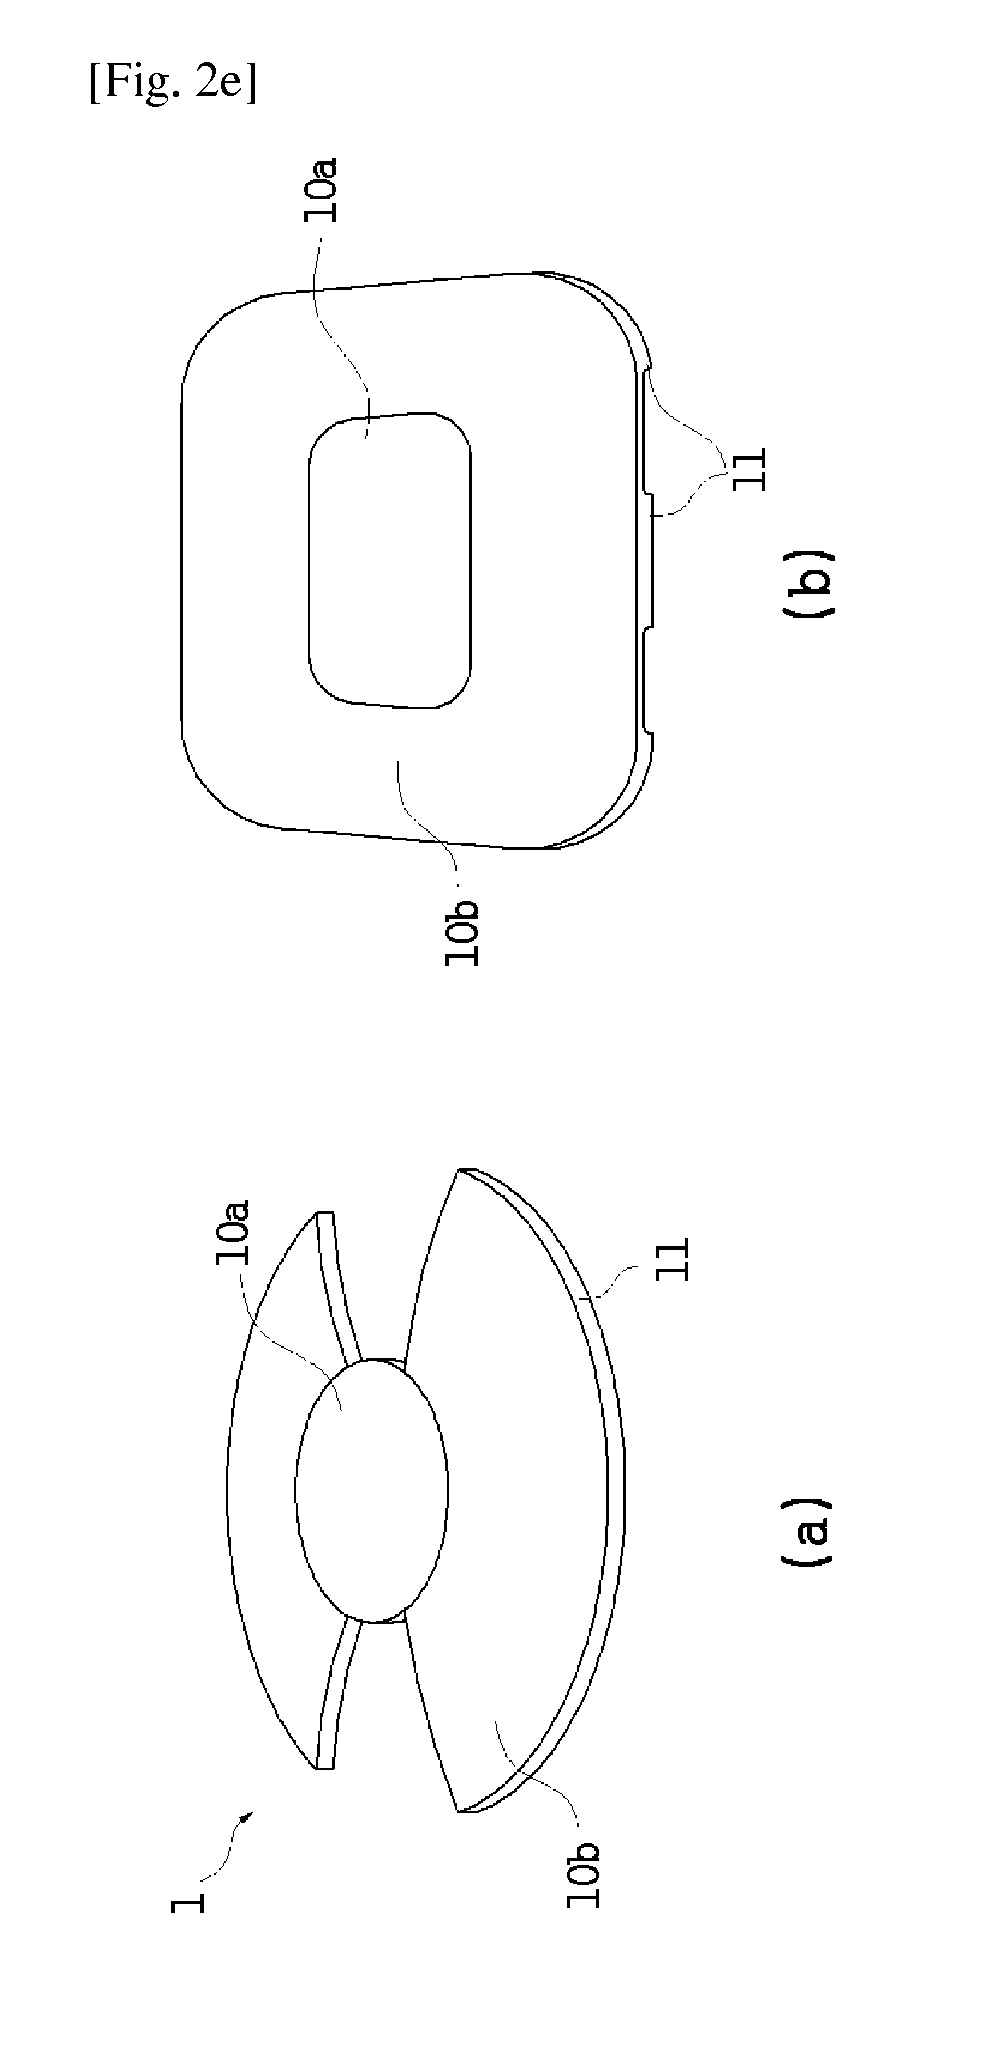 Piezoelectric element for power generation and power generation device using same